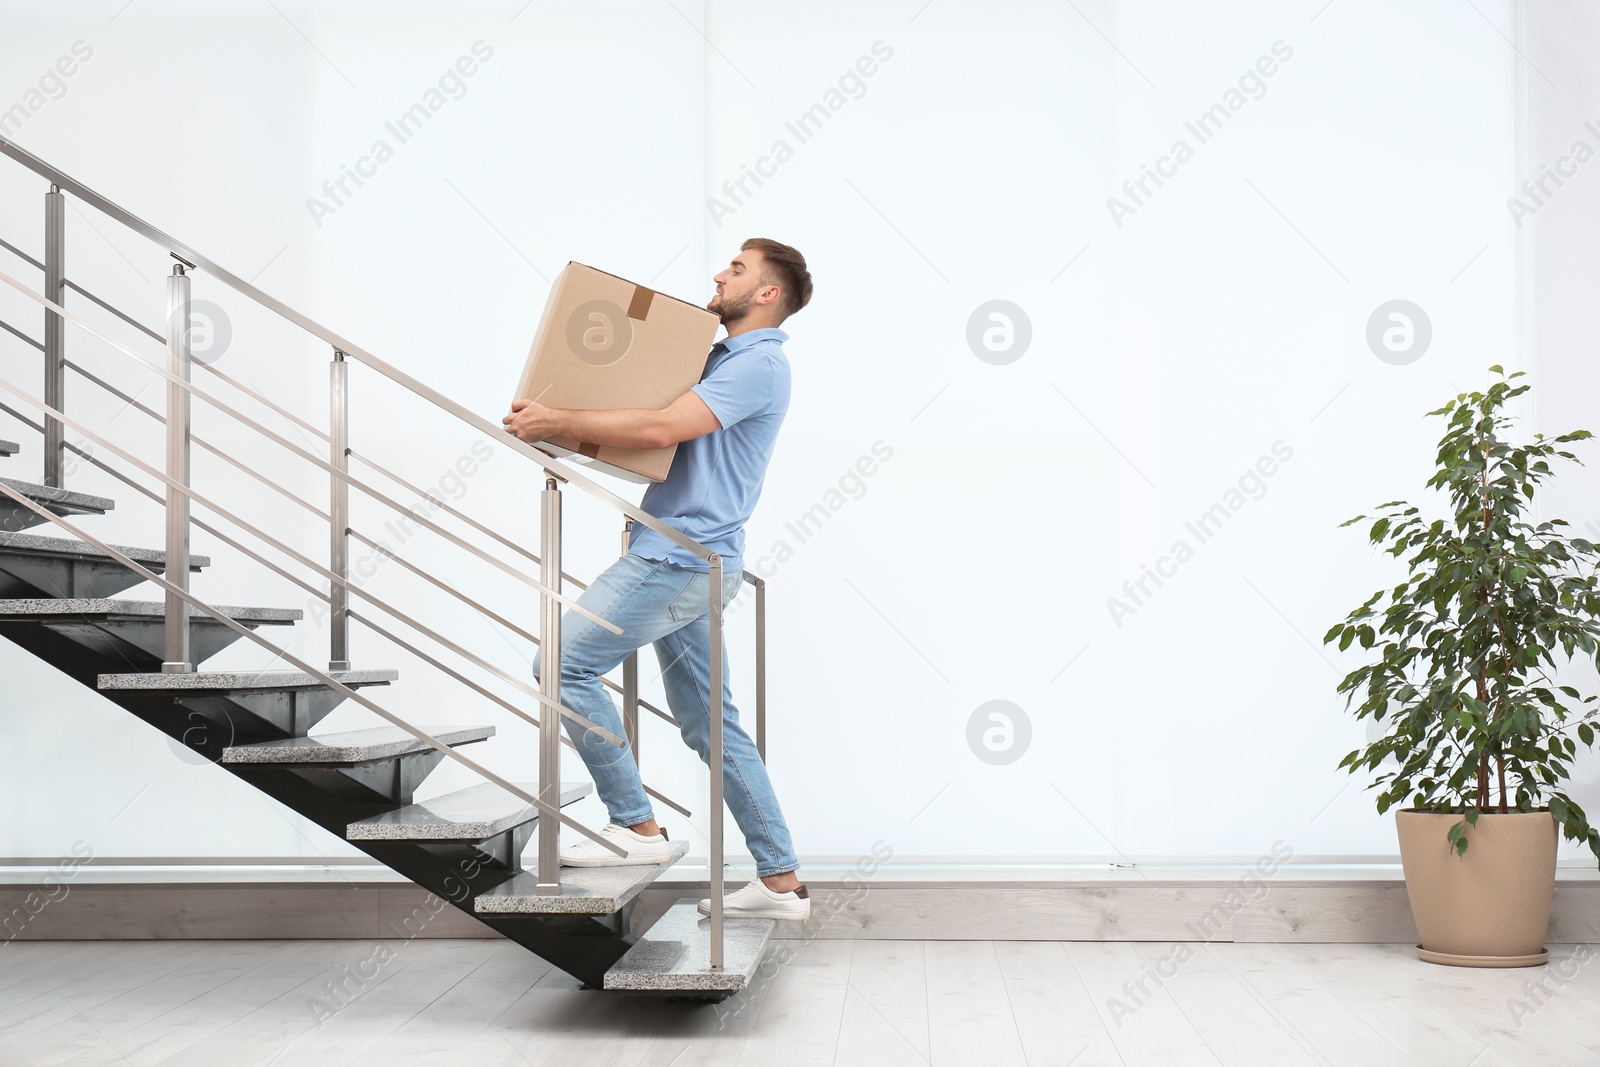 Photo of Young man carrying carton box upstairs indoors. Posture concept